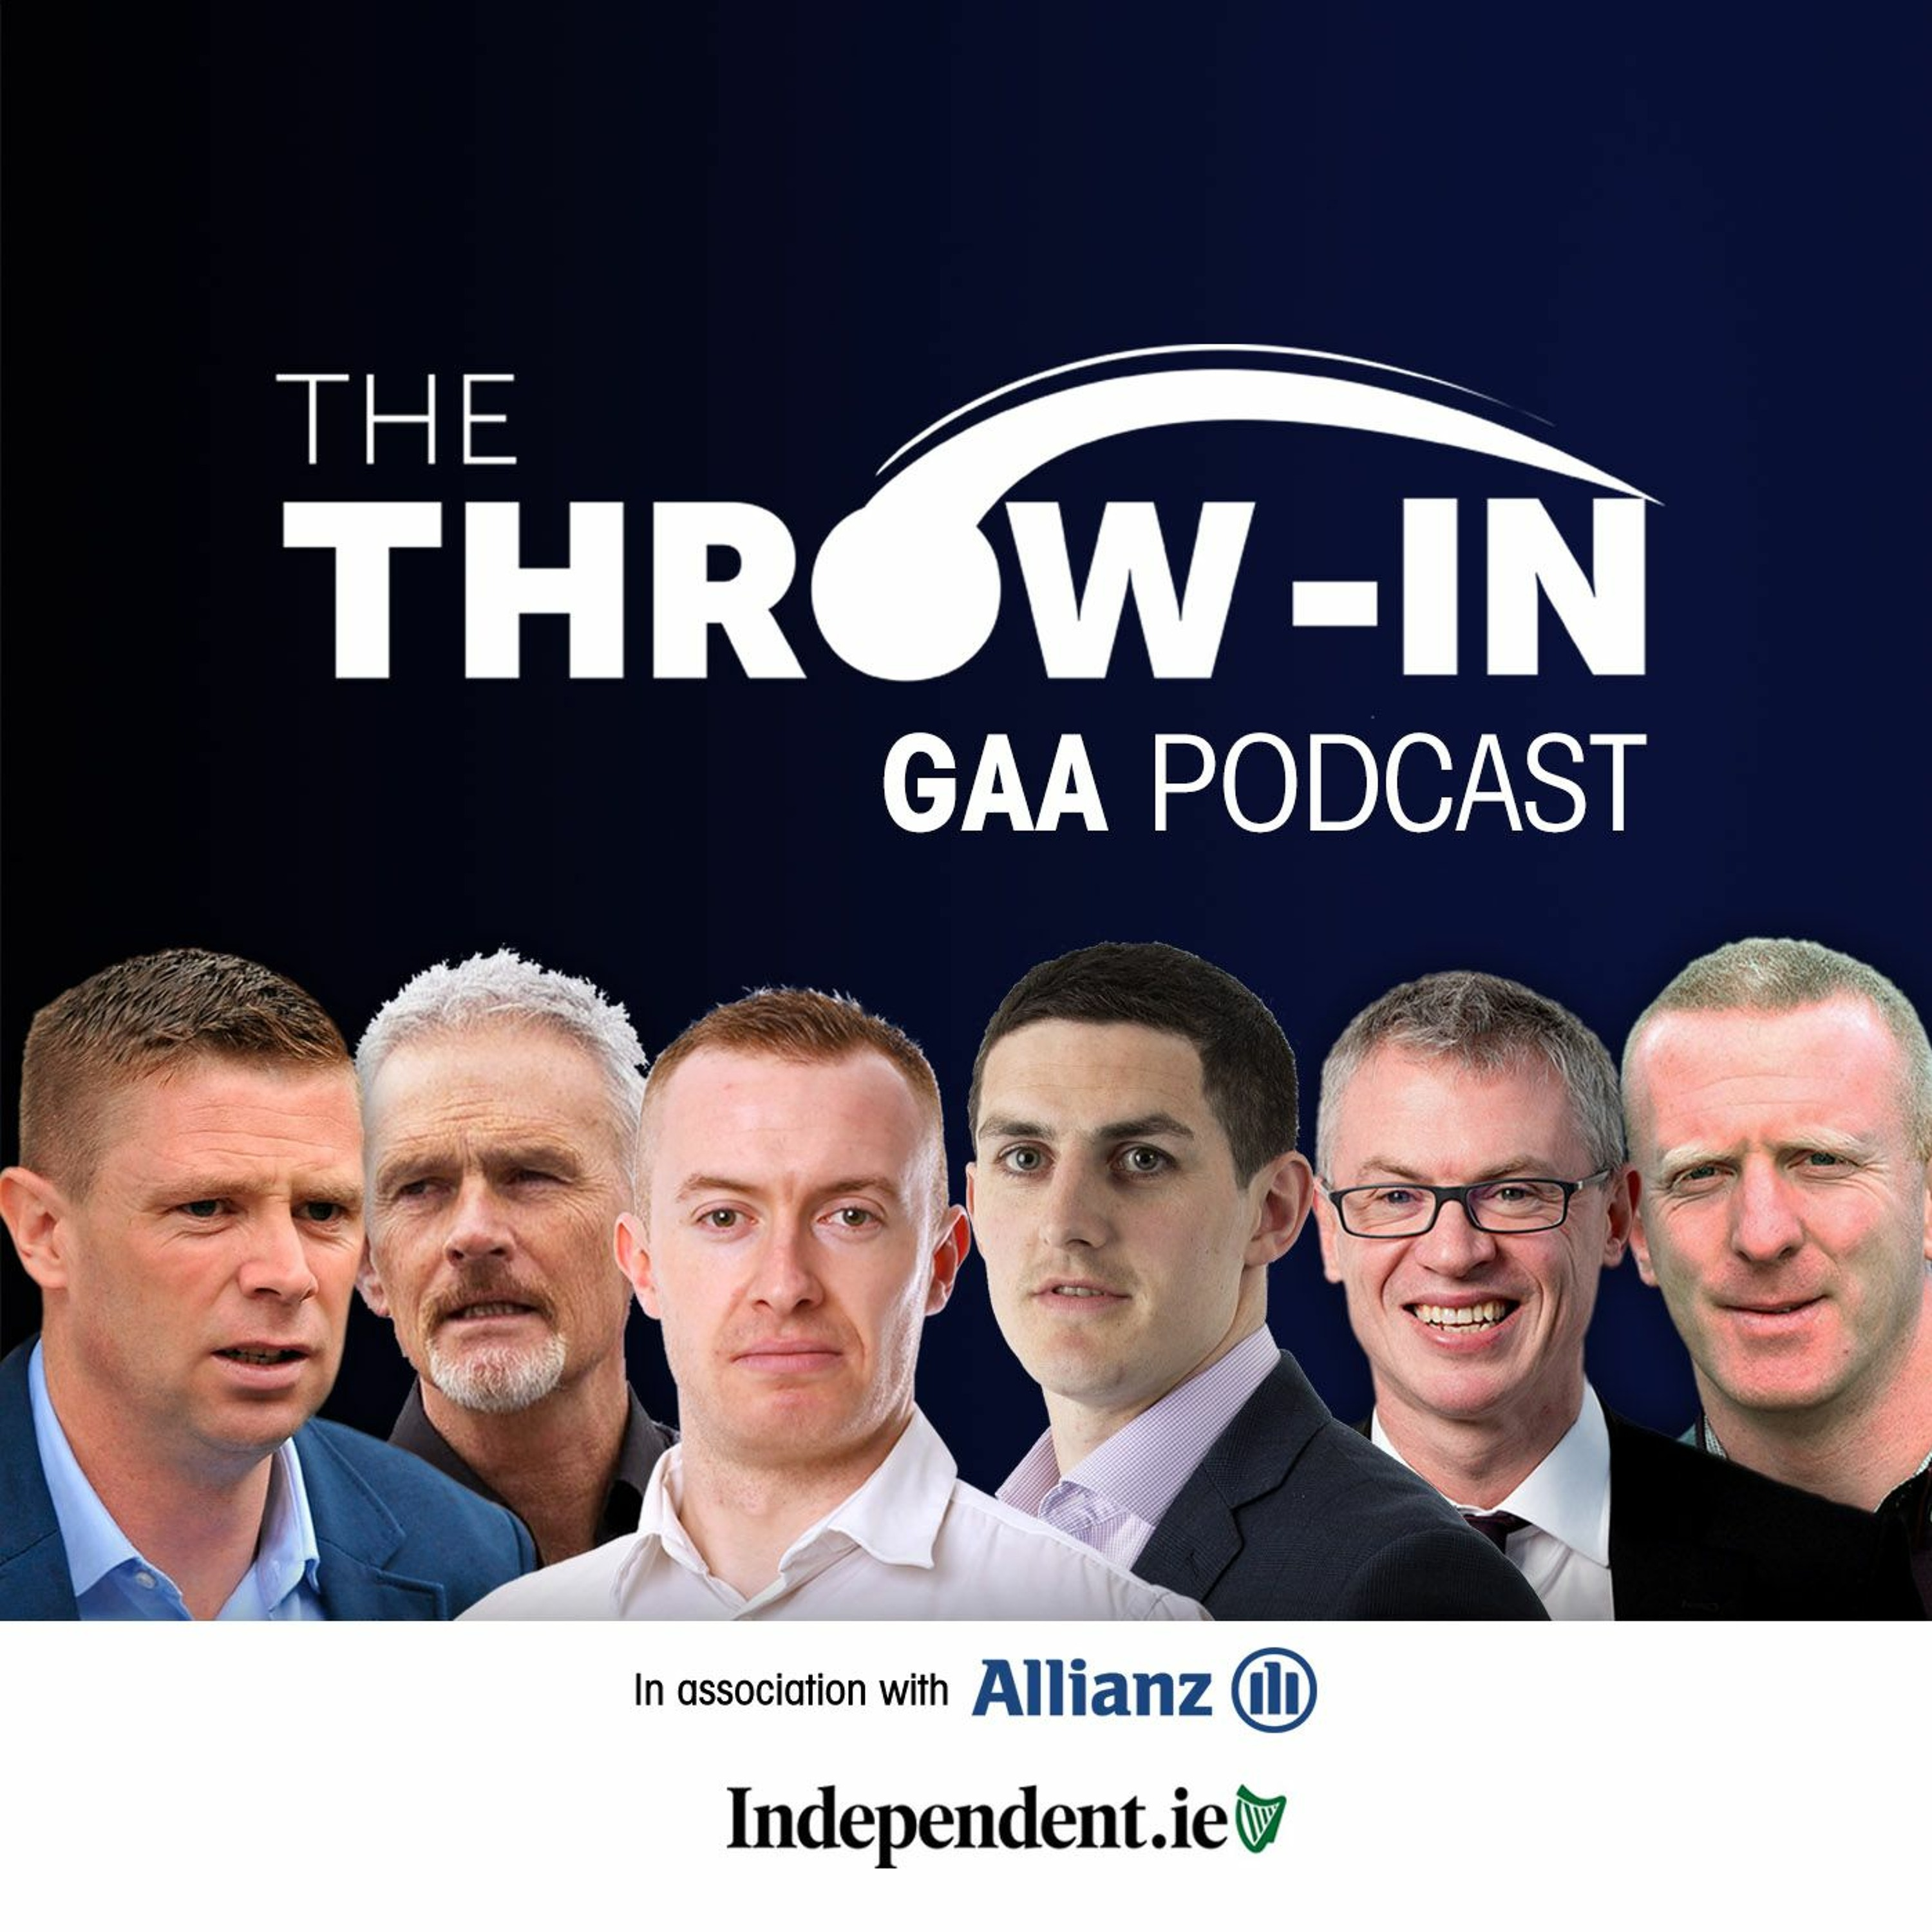 Offaly’s fall, Tipp’s consistency problem, and Wexford face up to Kilkenny